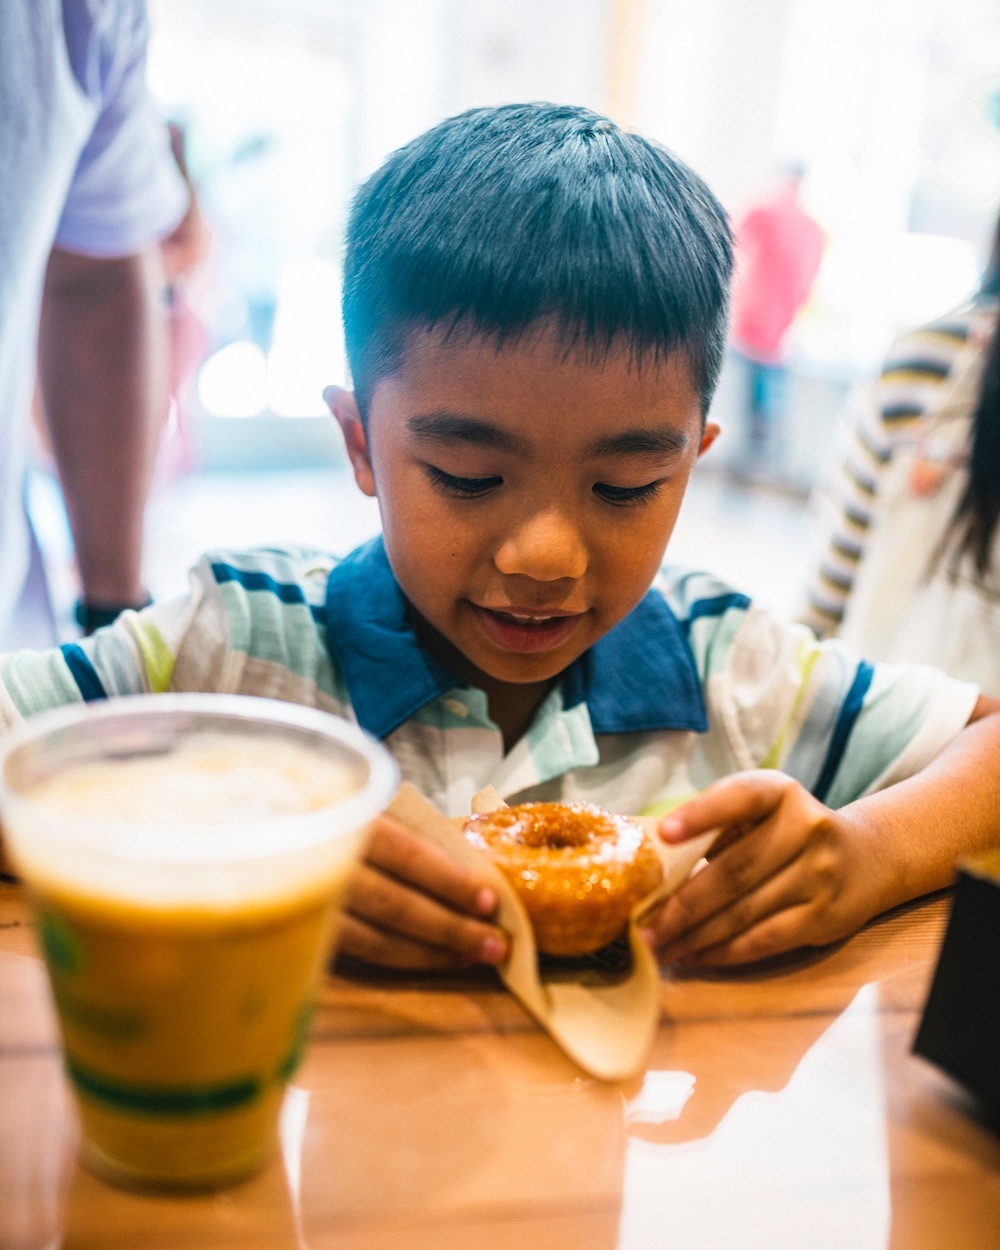 It&#039;s World Vegan Month! Find delectable eats and treats throughout Ward Village. Think chia fruit cups @aliicoffeeco, donuts @holeygraildonuts, pho @piggysmallshawaii, and roasted Turkish cauliflower @istanbulhawaii, to name just a few.